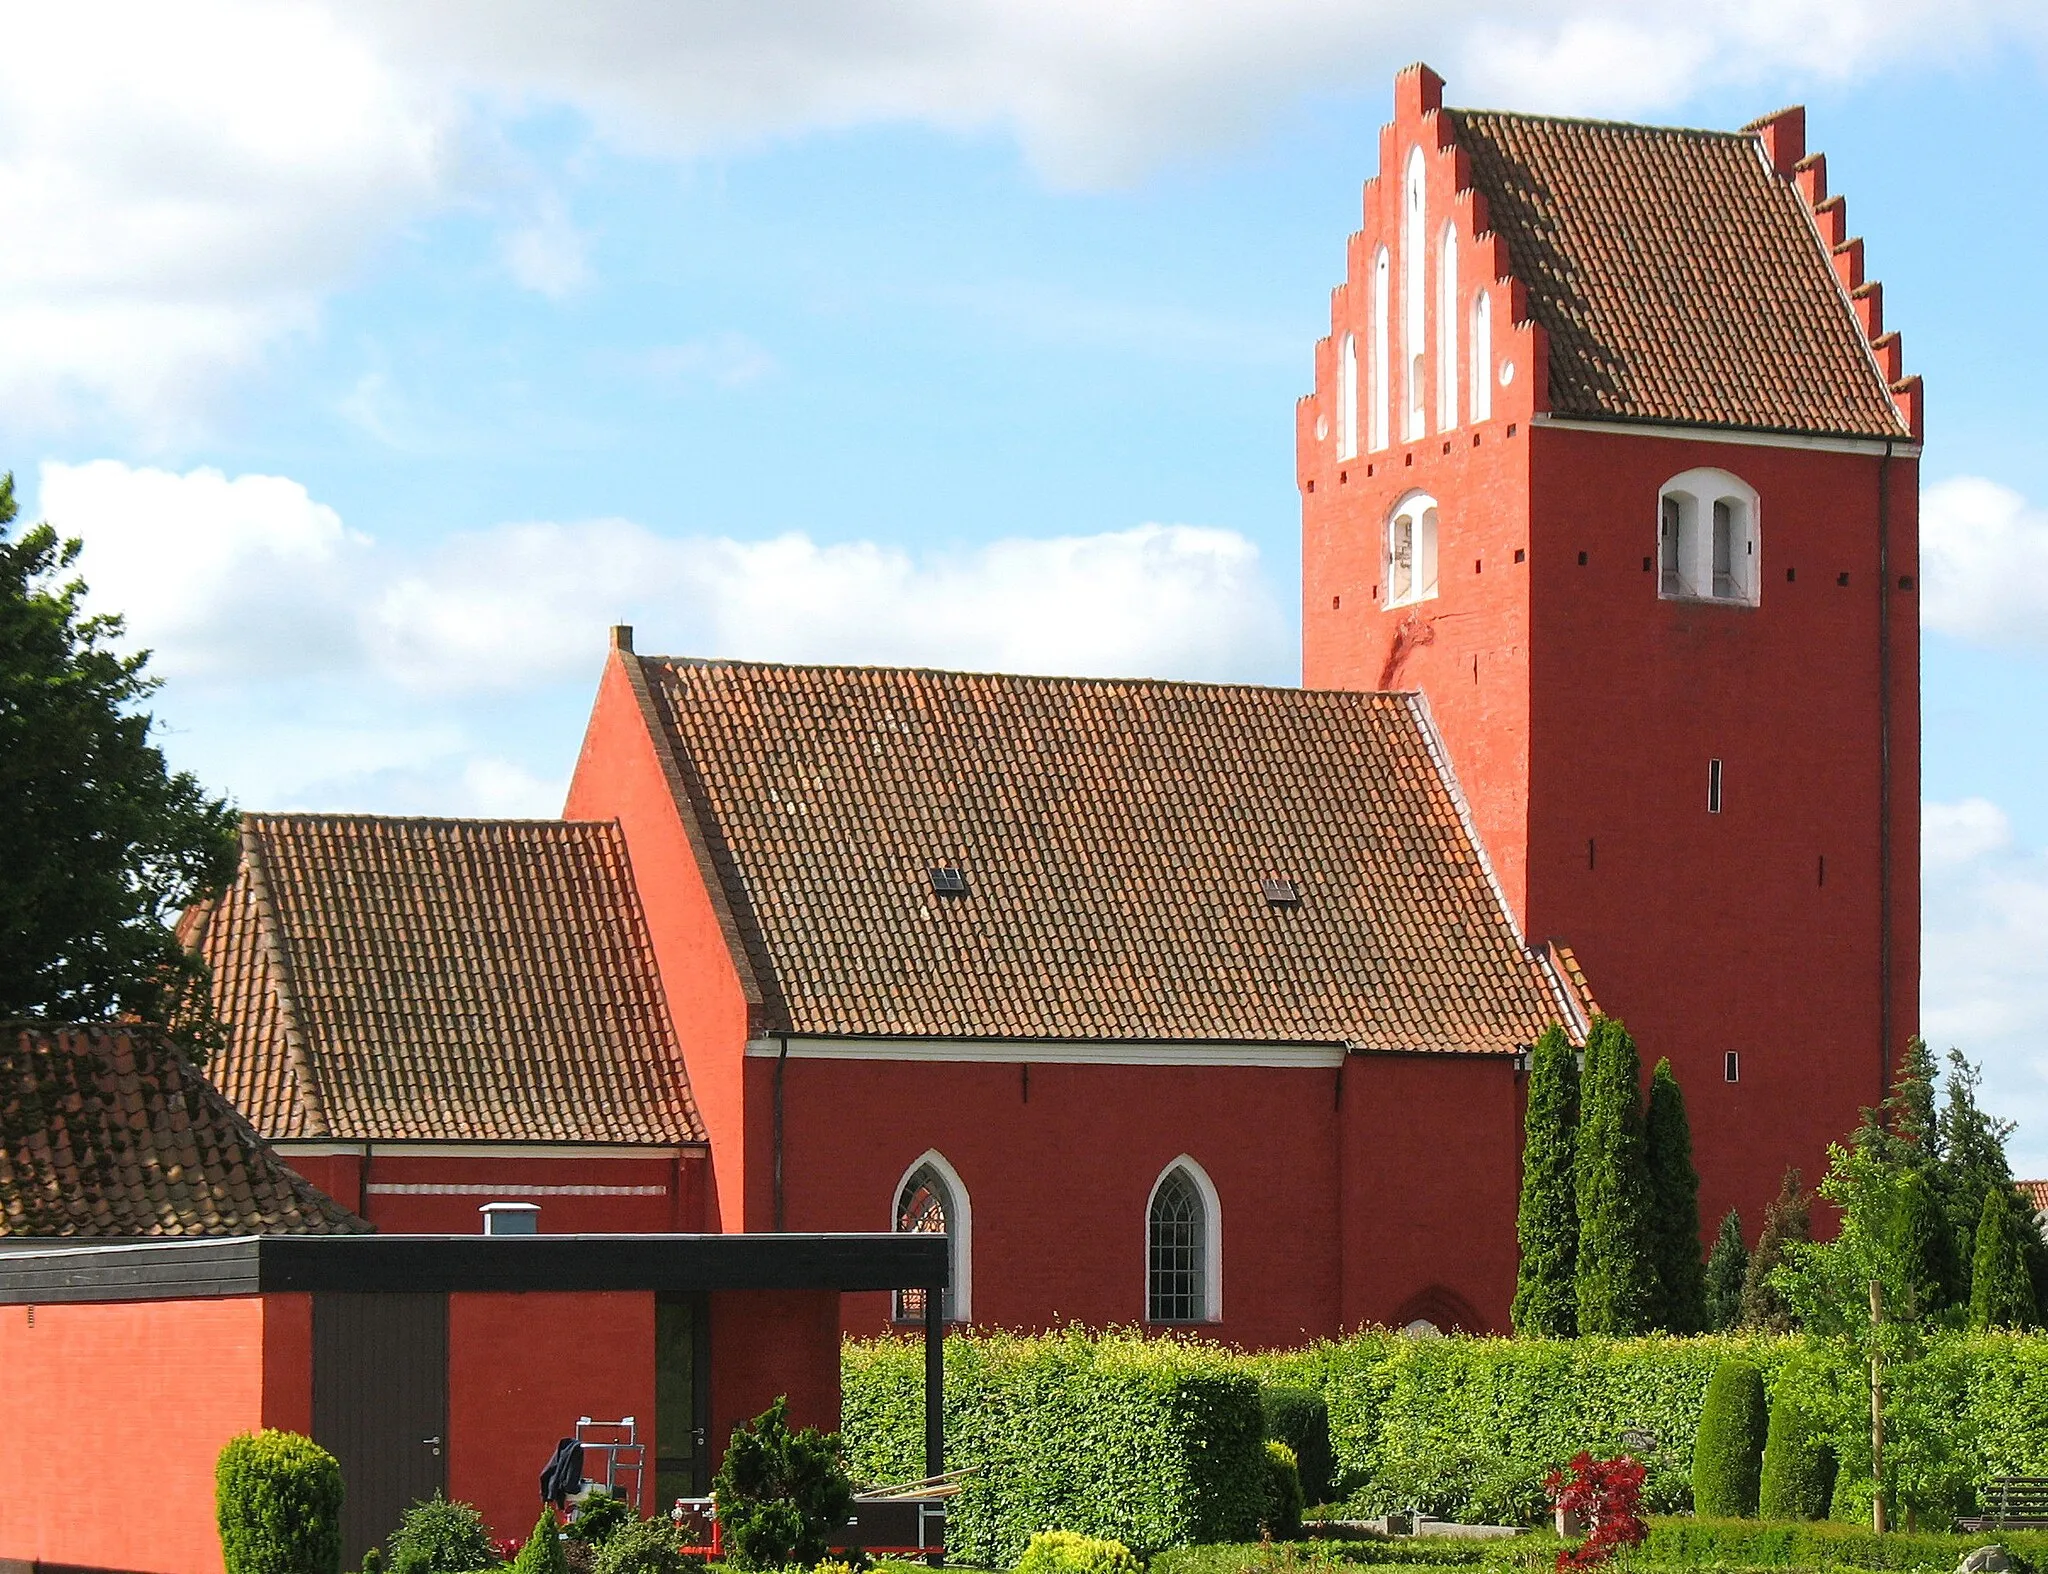 Photo showing: The church "Nørre Alslev Kirke" in the small town "Nørre Alslev". The town is located on the island Falster in east Denmark.